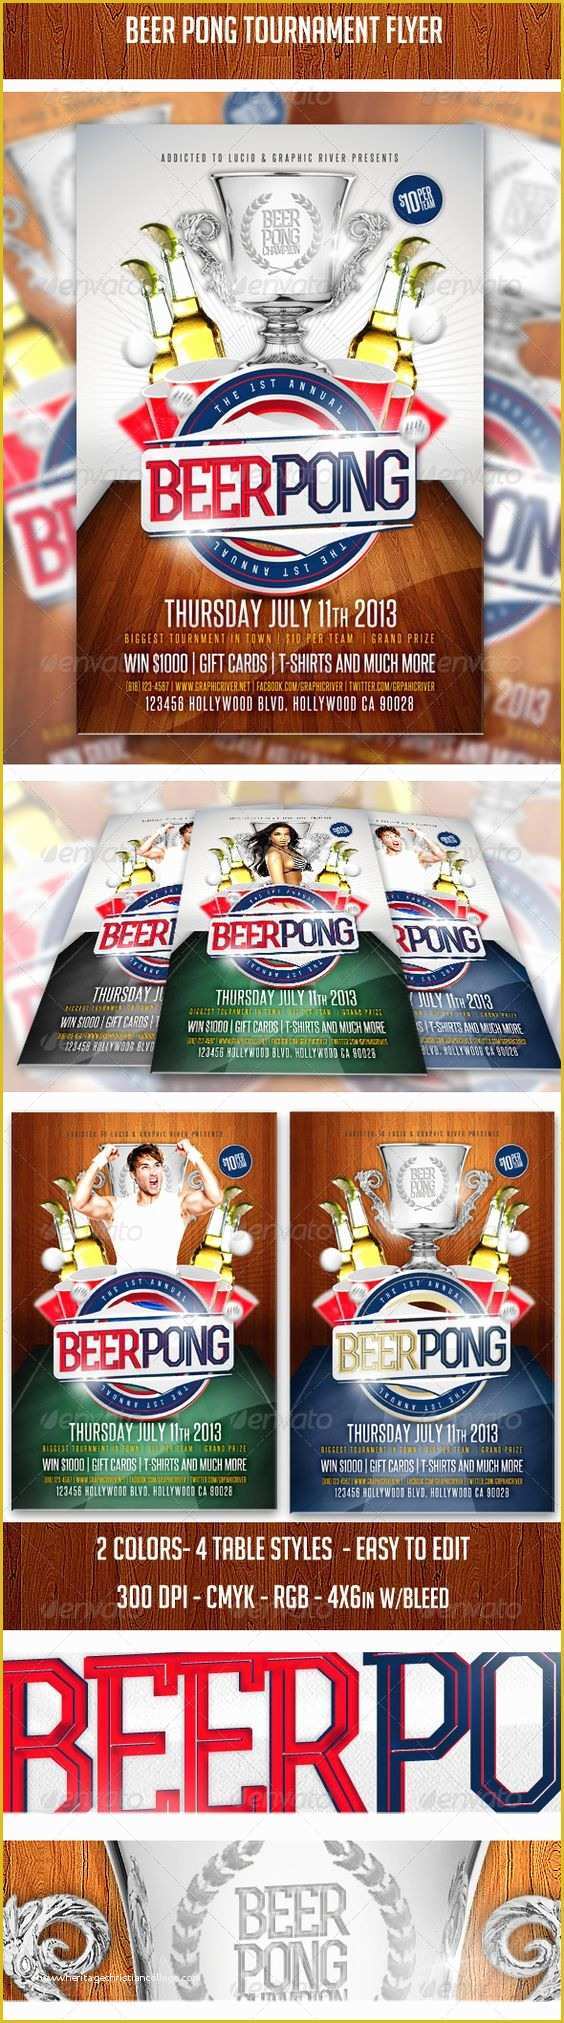 Free Beer Pong Flyer Template Of Beer Pong Flyers and Beer On Pinterest